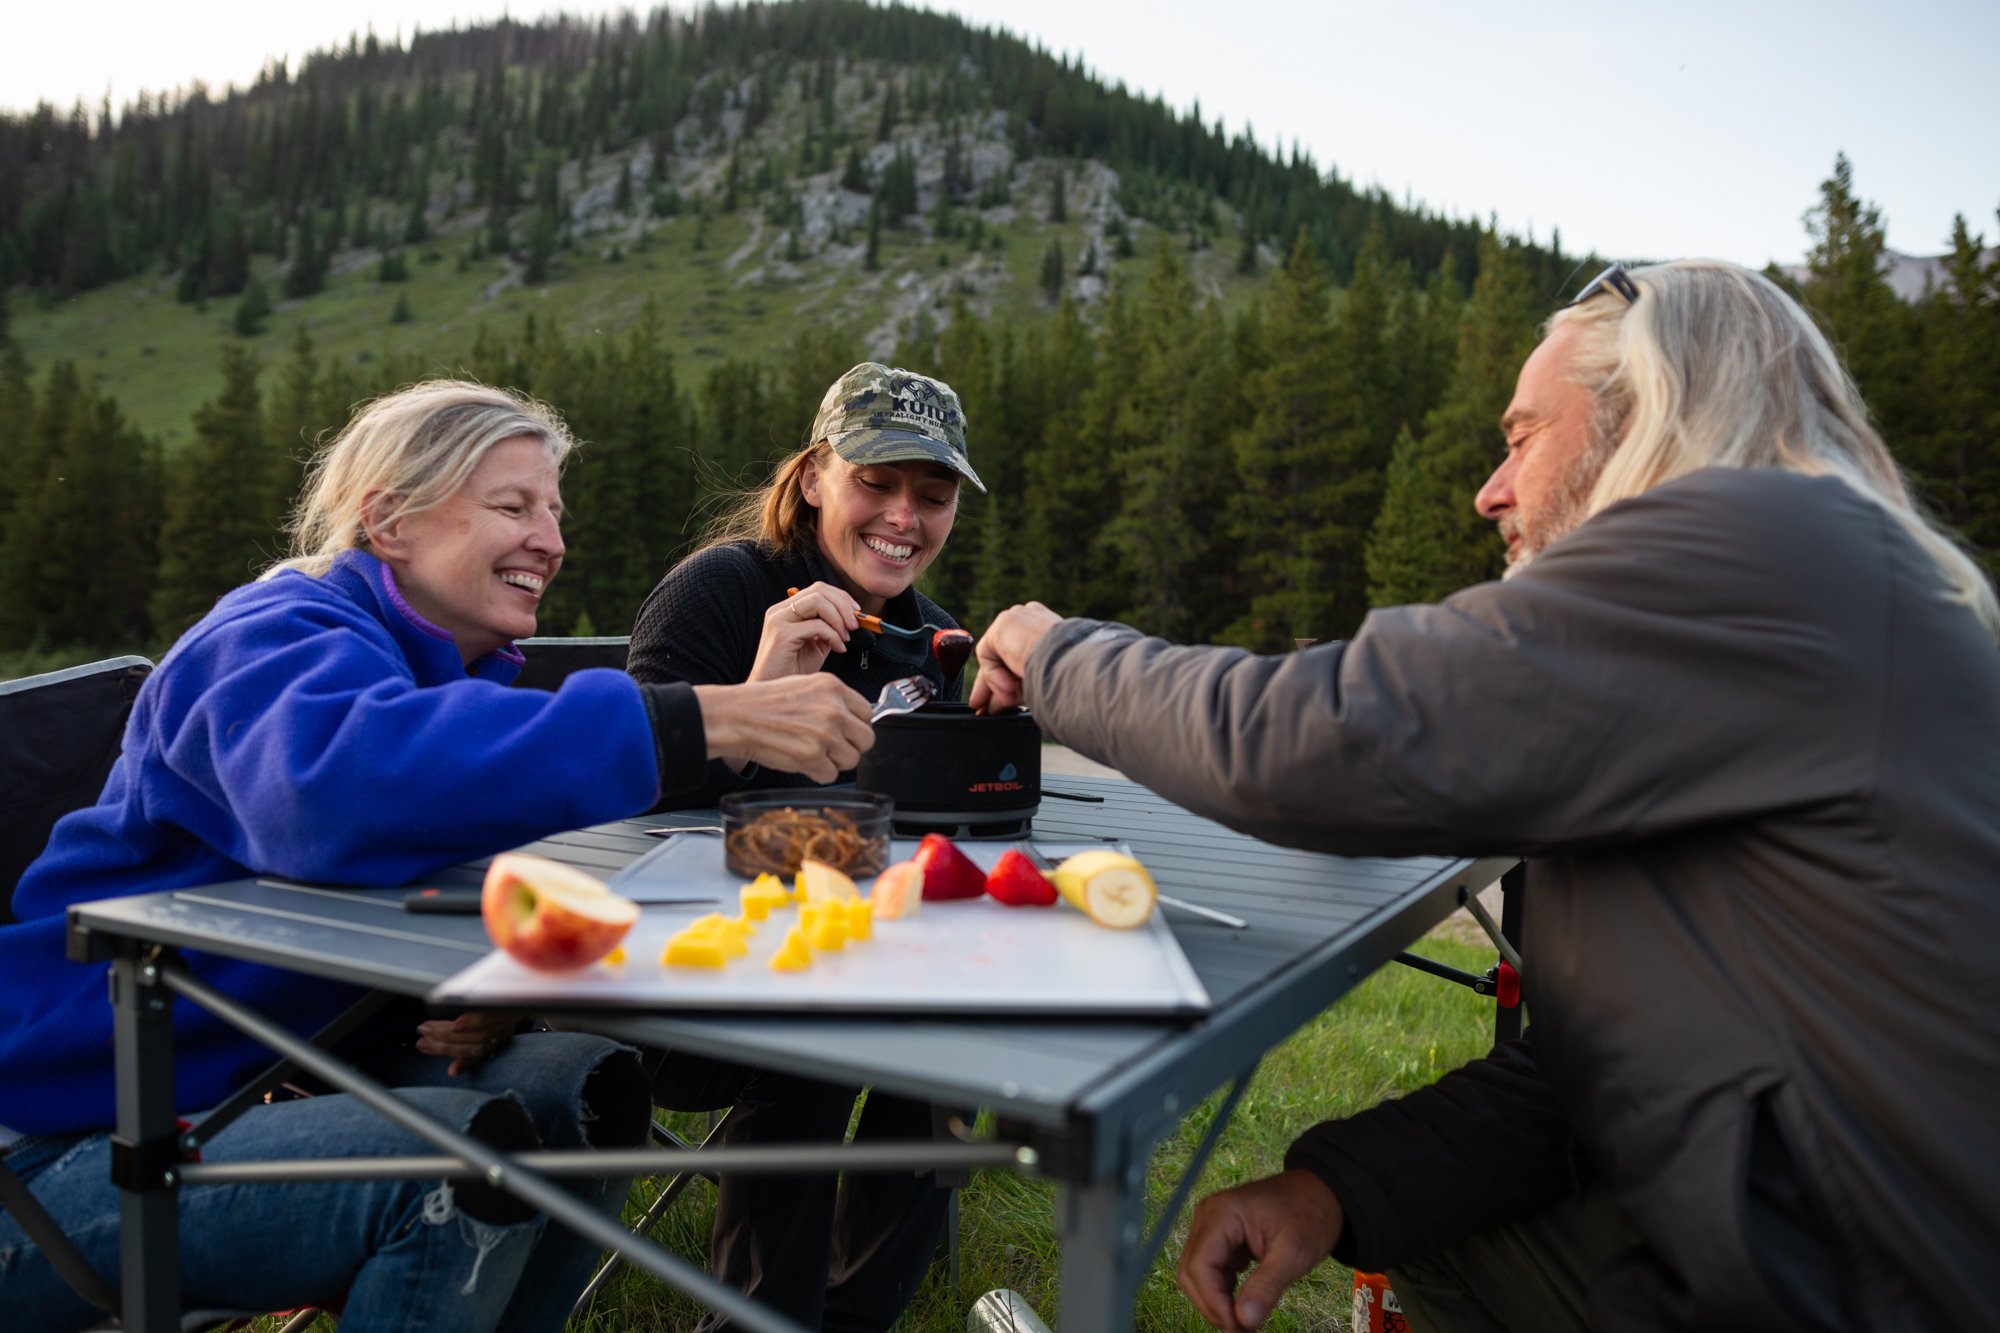 FAMILY EATING DINNER TOGETHER WHILE CAMPING